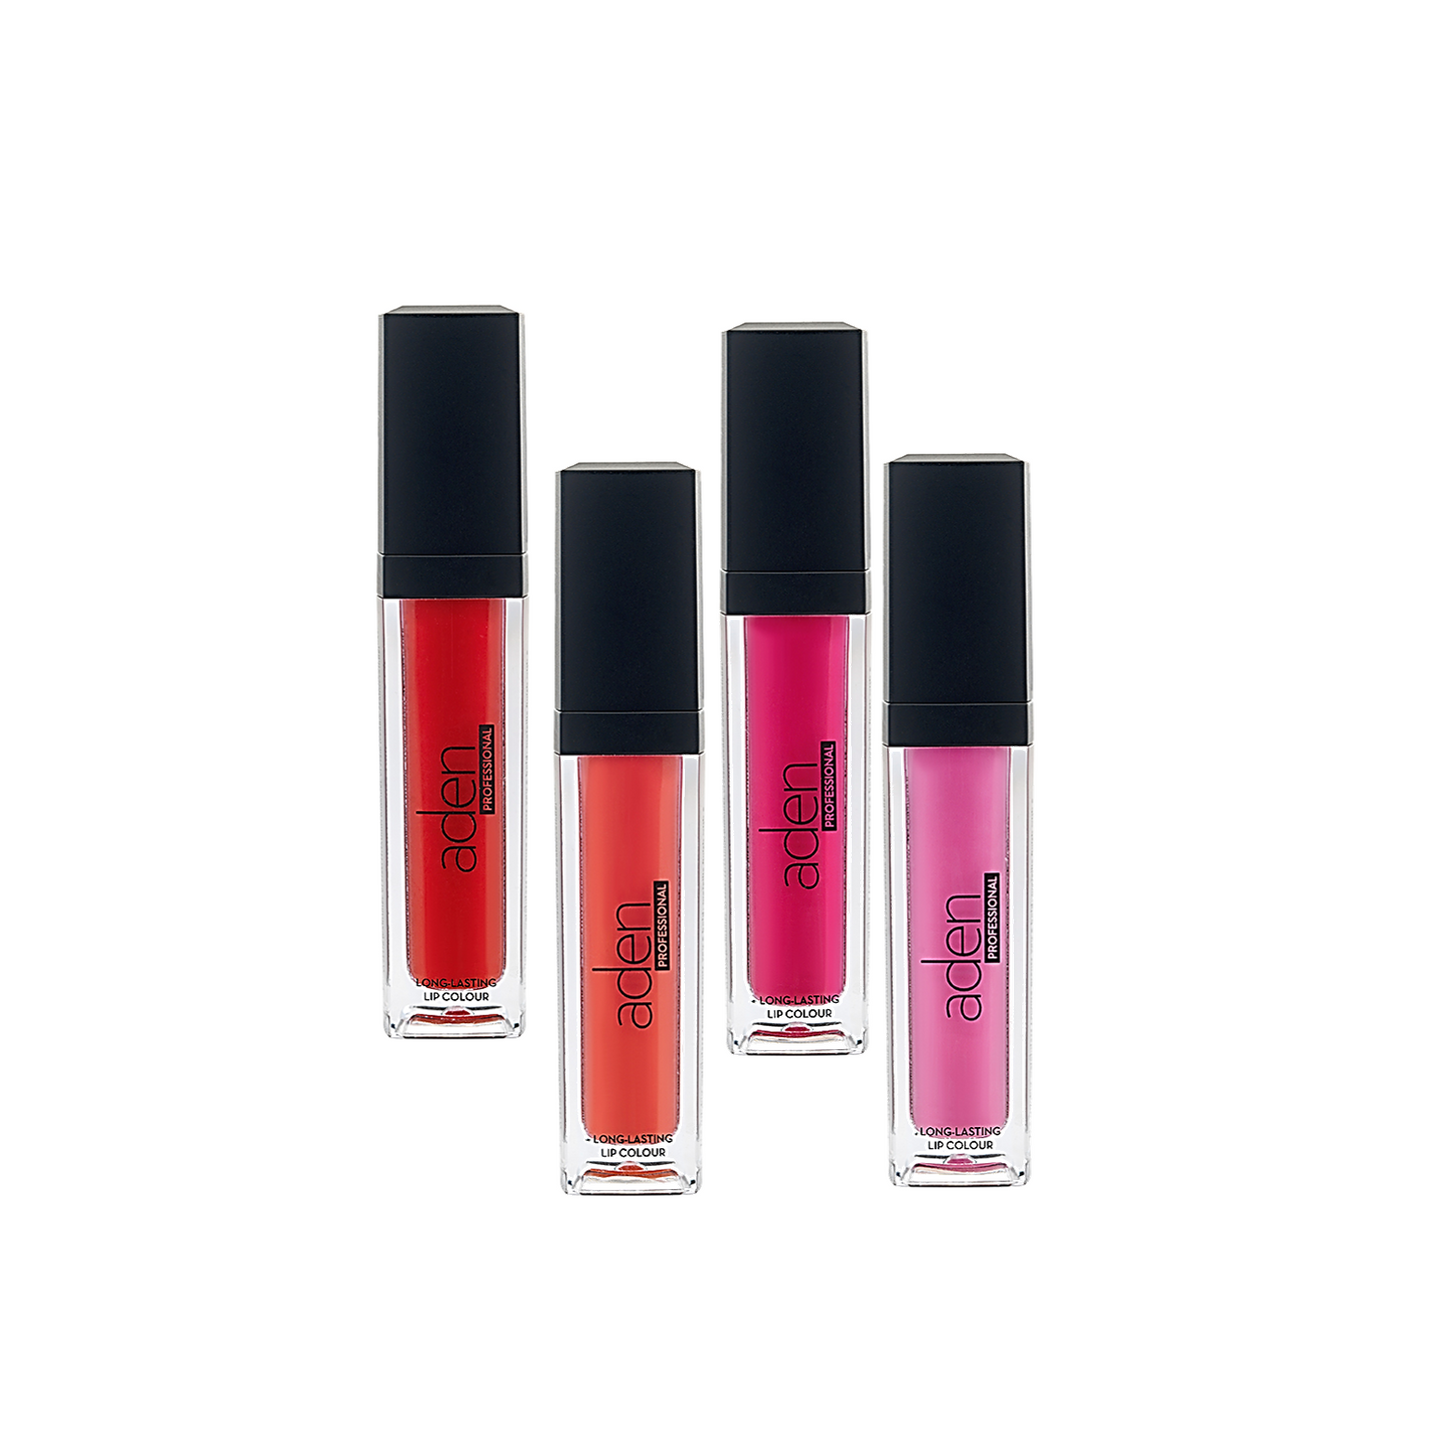 Plumping Lipstick, highly pigmented, aden